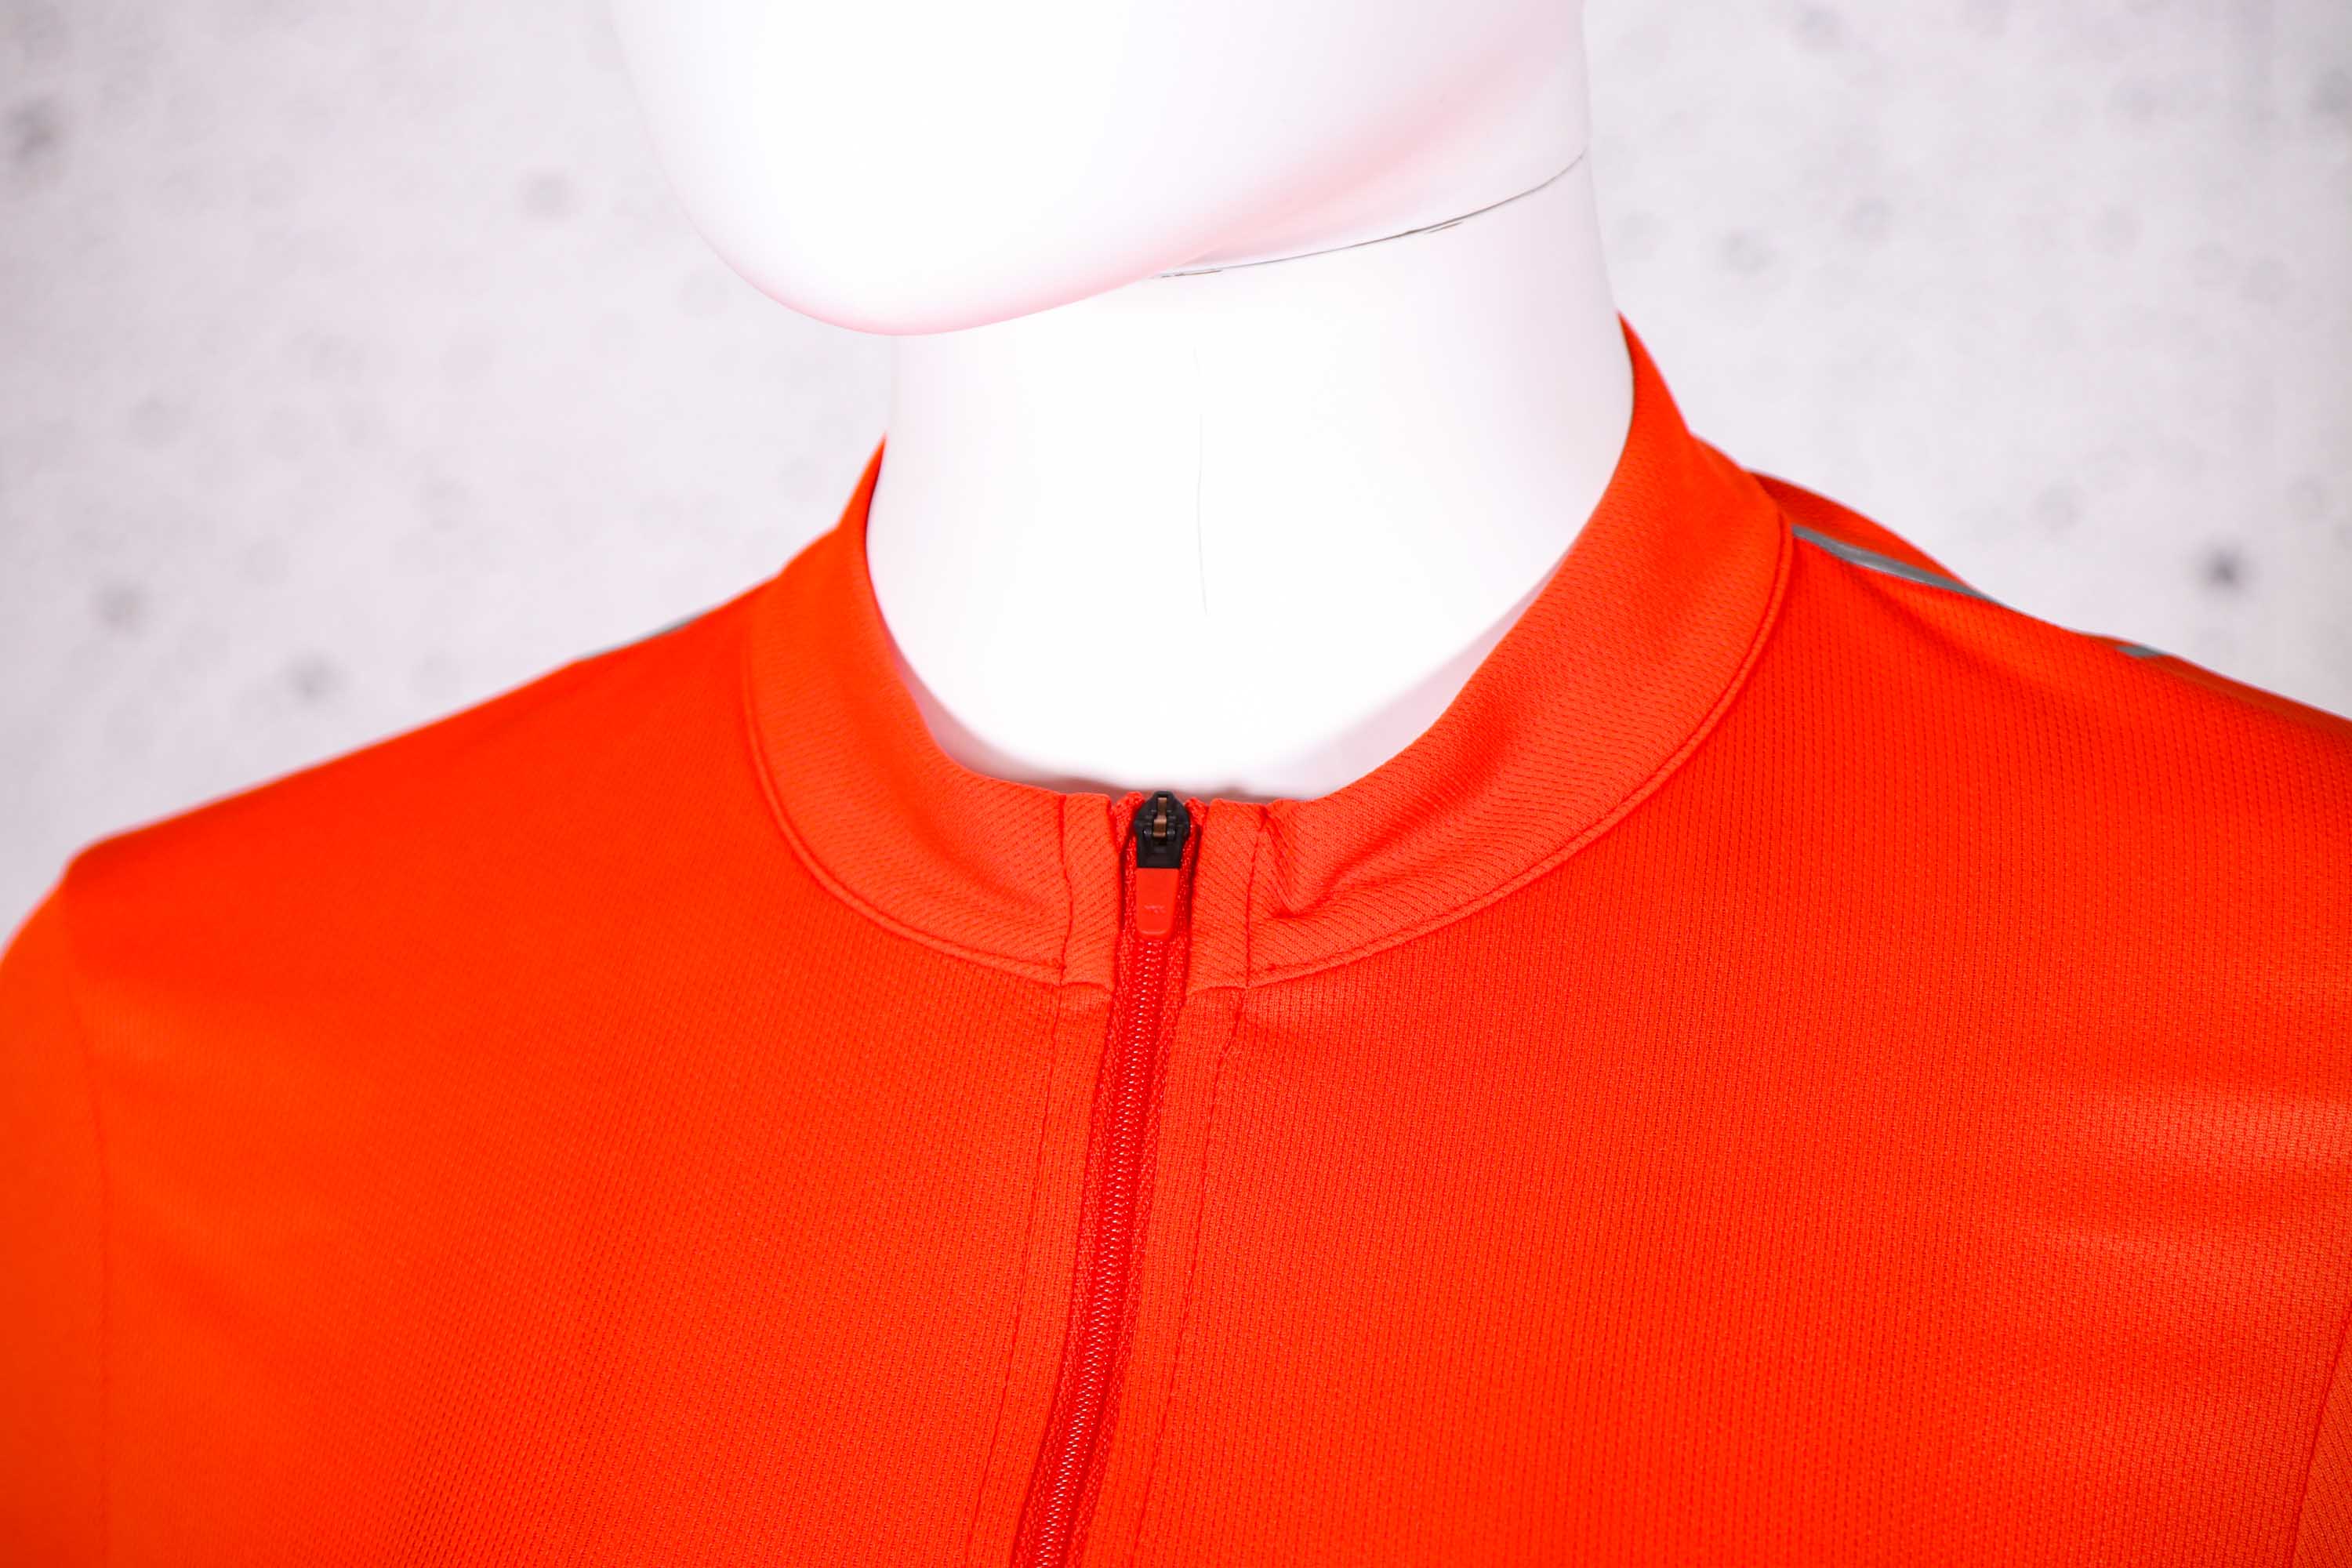 Review: CHPT3 Most Days Women’s Performance Jersey | road.cc